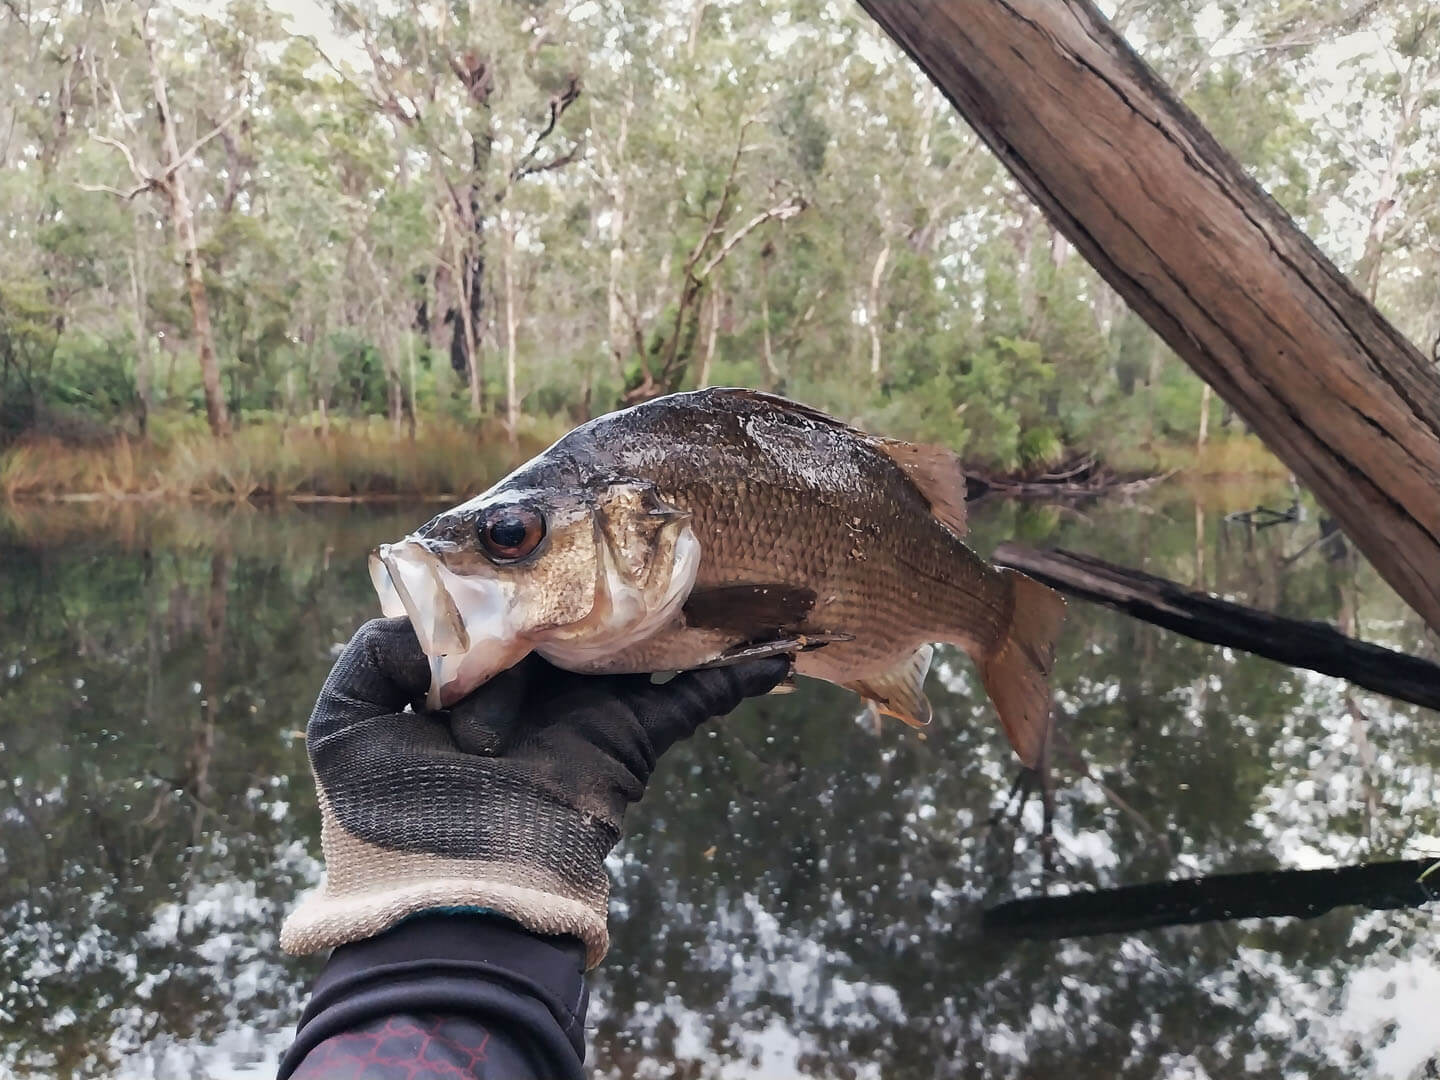 Estuary perch caught in the Esk River in Bundjalung NP, Northern NSW.